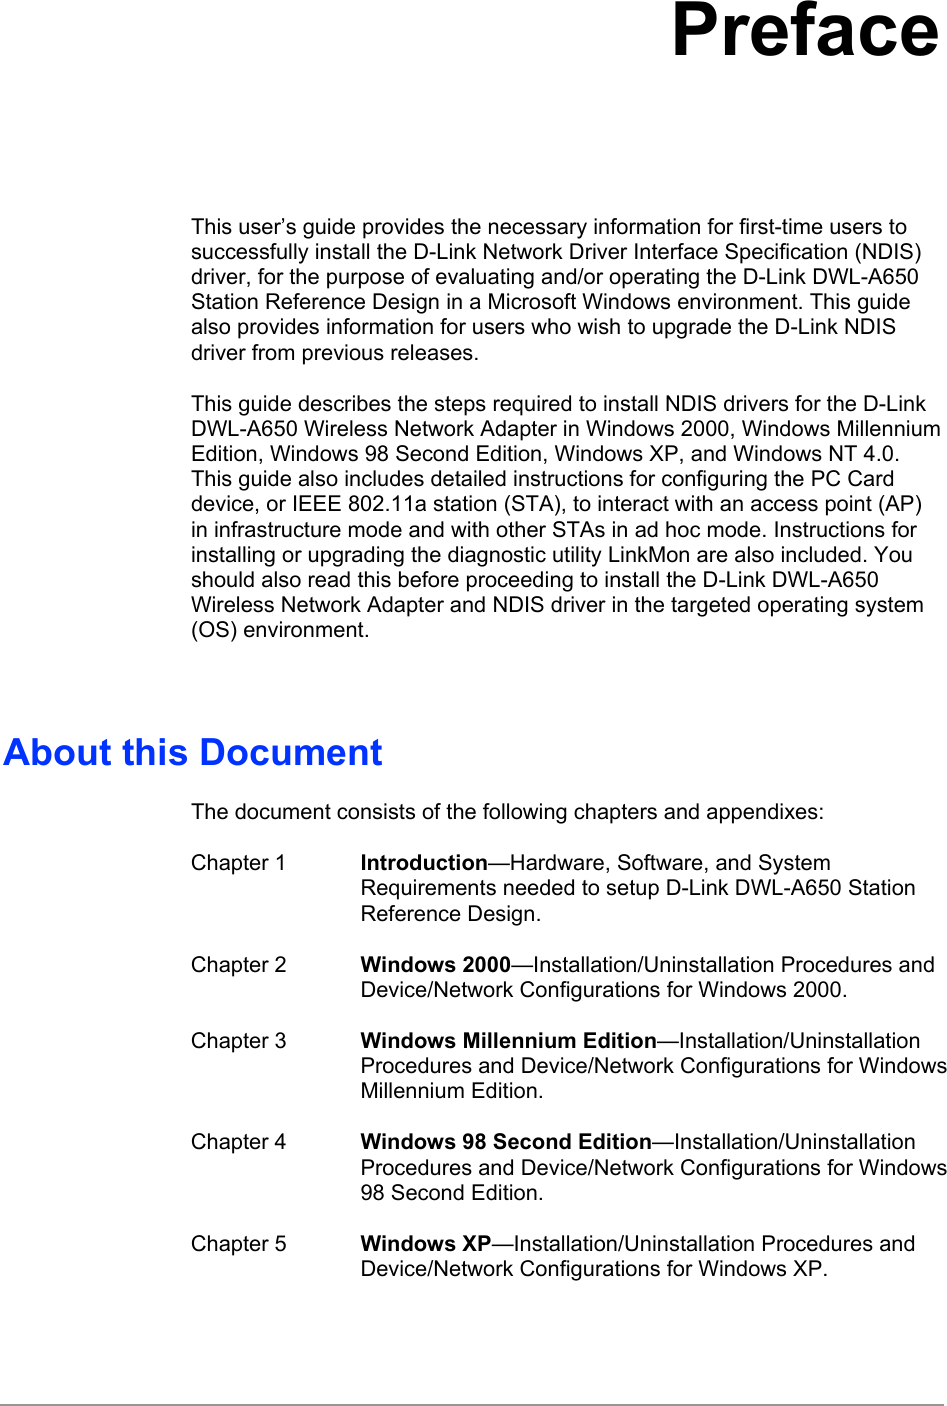   Preface This user’s guide provides the necessary information for first-time users to successfully install the D-Link Network Driver Interface Specification (NDIS) driver, for the purpose of evaluating and/or operating the D-Link DWL-A650 Station Reference Design in a Microsoft Windows environment. This guide also provides information for users who wish to upgrade the D-Link NDIS driver from previous releases. This guide describes the steps required to install NDIS drivers for the D-Link DWL-A650 Wireless Network Adapter in Windows 2000, Windows Millennium Edition, Windows 98 Second Edition, Windows XP, and Windows NT 4.0. This guide also includes detailed instructions for configuring the PC Card device, or IEEE 802.11a station (STA), to interact with an access point (AP) in infrastructure mode and with other STAs in ad hoc mode. Instructions for installing or upgrading the diagnostic utility LinkMon are also included. You should also read this before proceeding to install the D-Link DWL-A650 Wireless Network Adapter and NDIS driver in the targeted operating system (OS) environment.  About this Document The document consists of the following chapters and appendixes: Chapter 1  Introduction—Hardware, Software, and System Requirements needed to setup D-Link DWL-A650 Station Reference Design. Chapter 2  Windows 2000—Installation/Uninstallation Procedures and Device/Network Configurations for Windows 2000. Chapter 3  Windows Millennium Edition—Installation/Uninstallation Procedures and Device/Network Configurations for Windows Millennium Edition. Chapter 4  Windows 98 Second Edition—Installation/Uninstallation Procedures and Device/Network Configurations for Windows 98 Second Edition. Chapter 5  Windows XP—Installation/Uninstallation Procedures and Device/Network Configurations for Windows XP. 